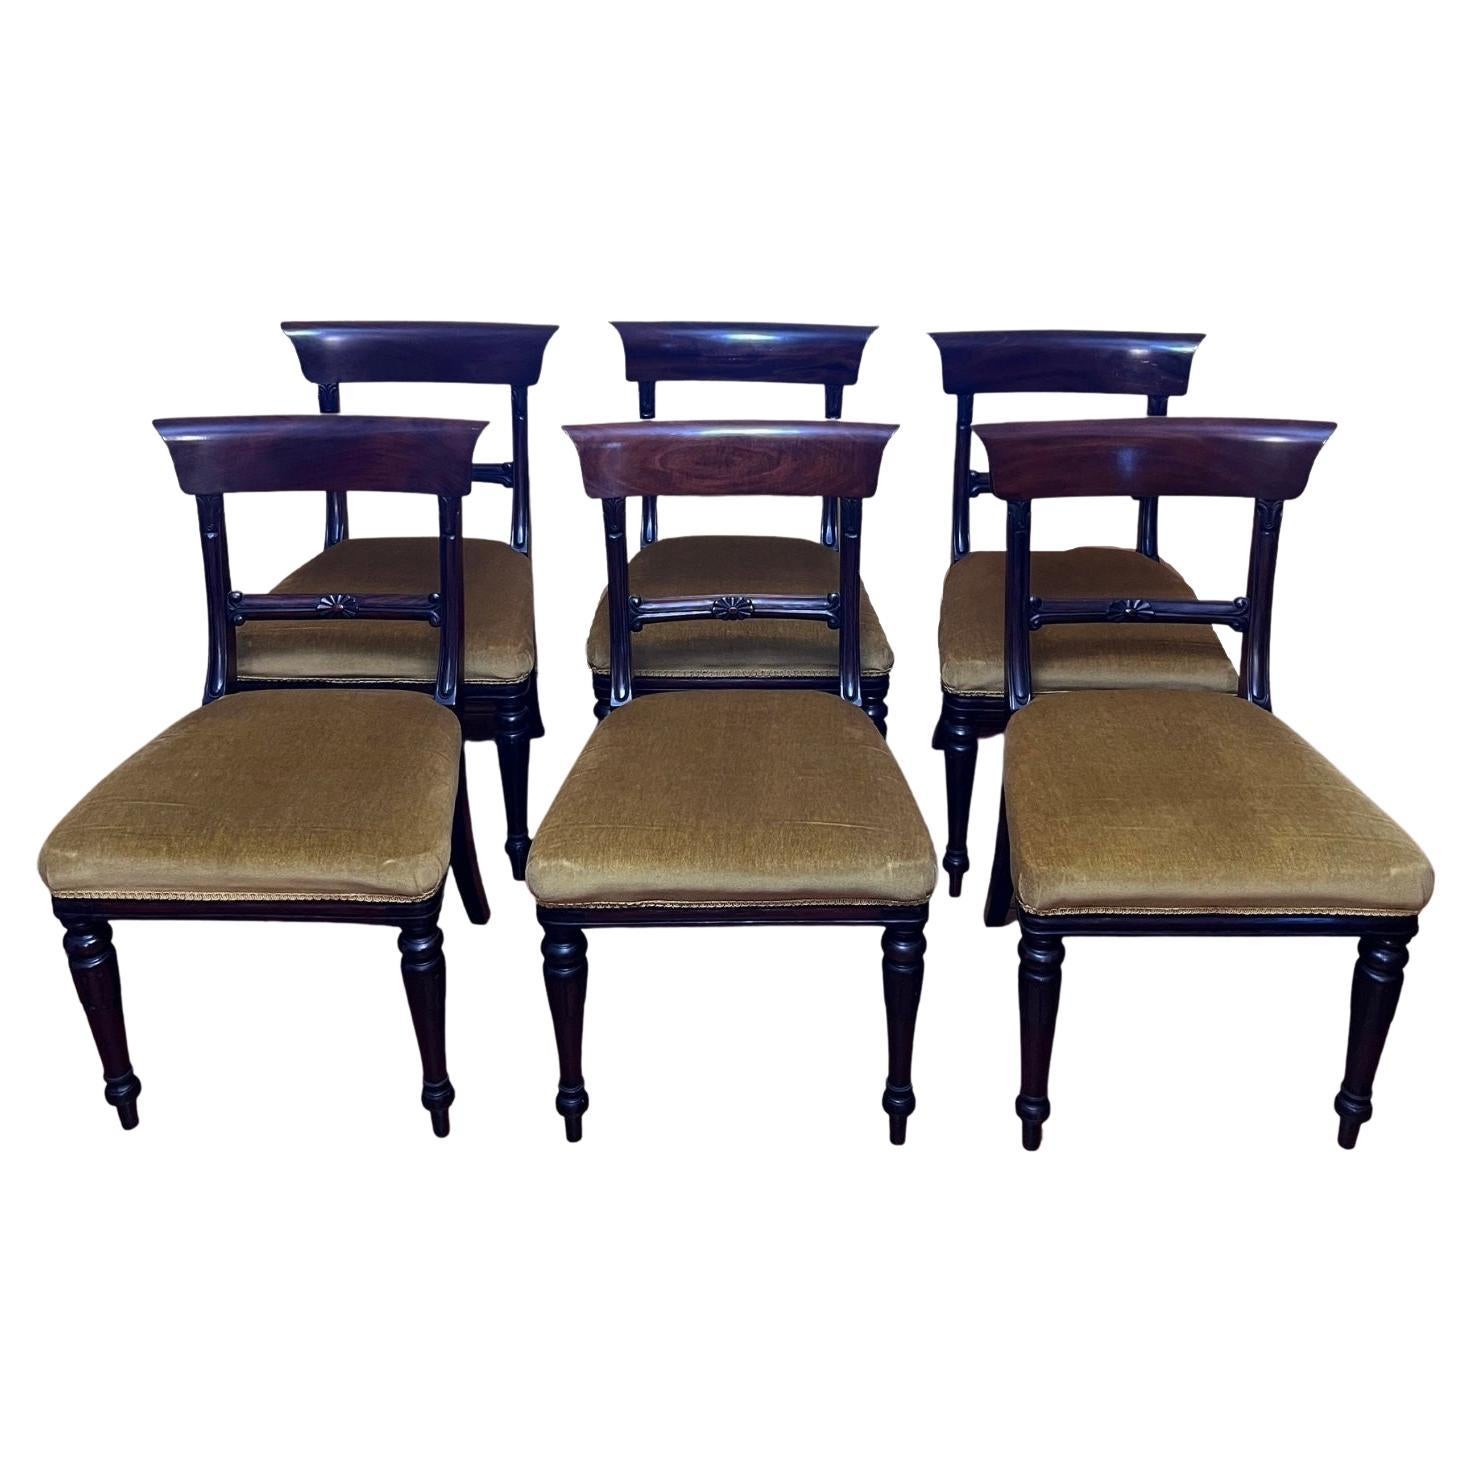 Antique English Mahogany Gold Velvet Chairs Six Set For Sale